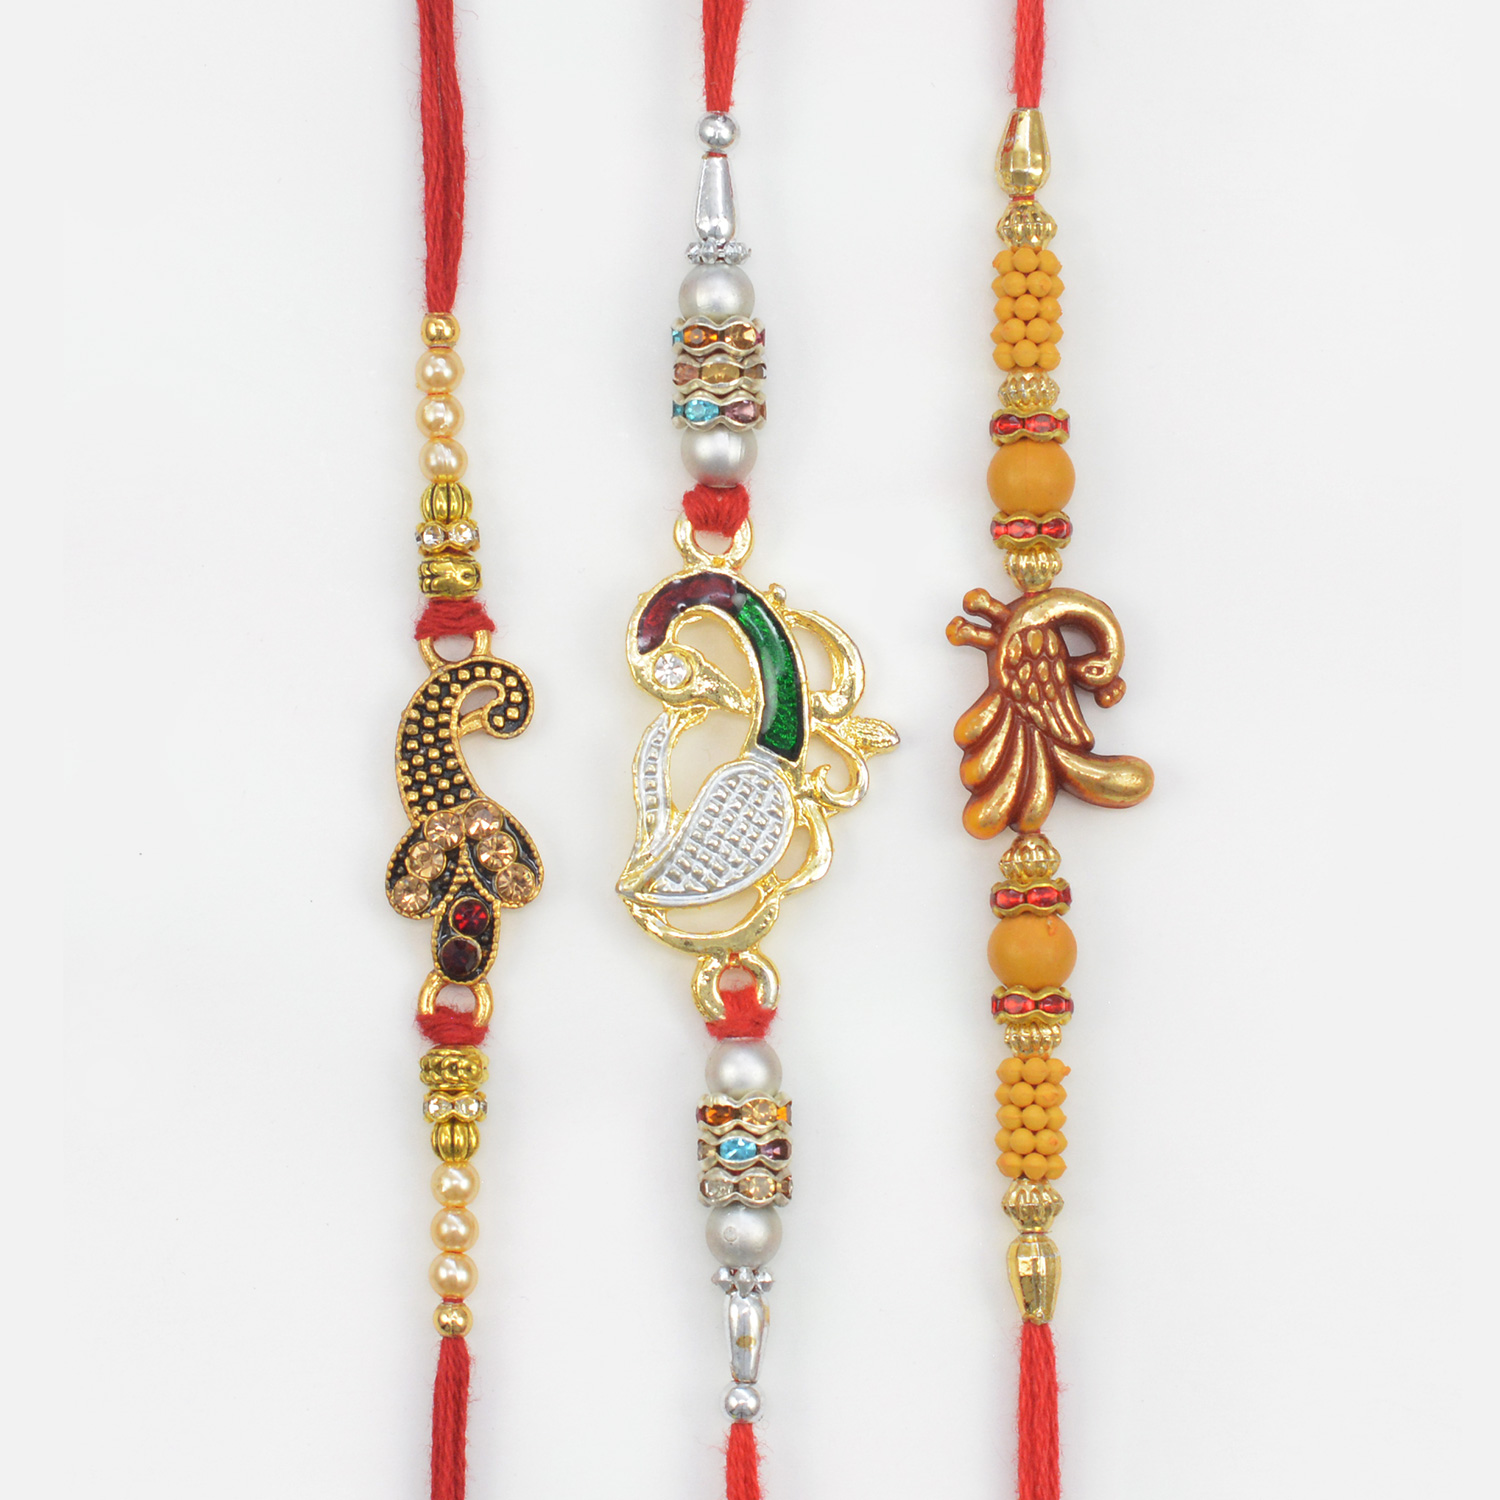 Peacock Lover Rakhis for 3 Brother Newly Designed and Amazing Looking Three Brother Rakhis